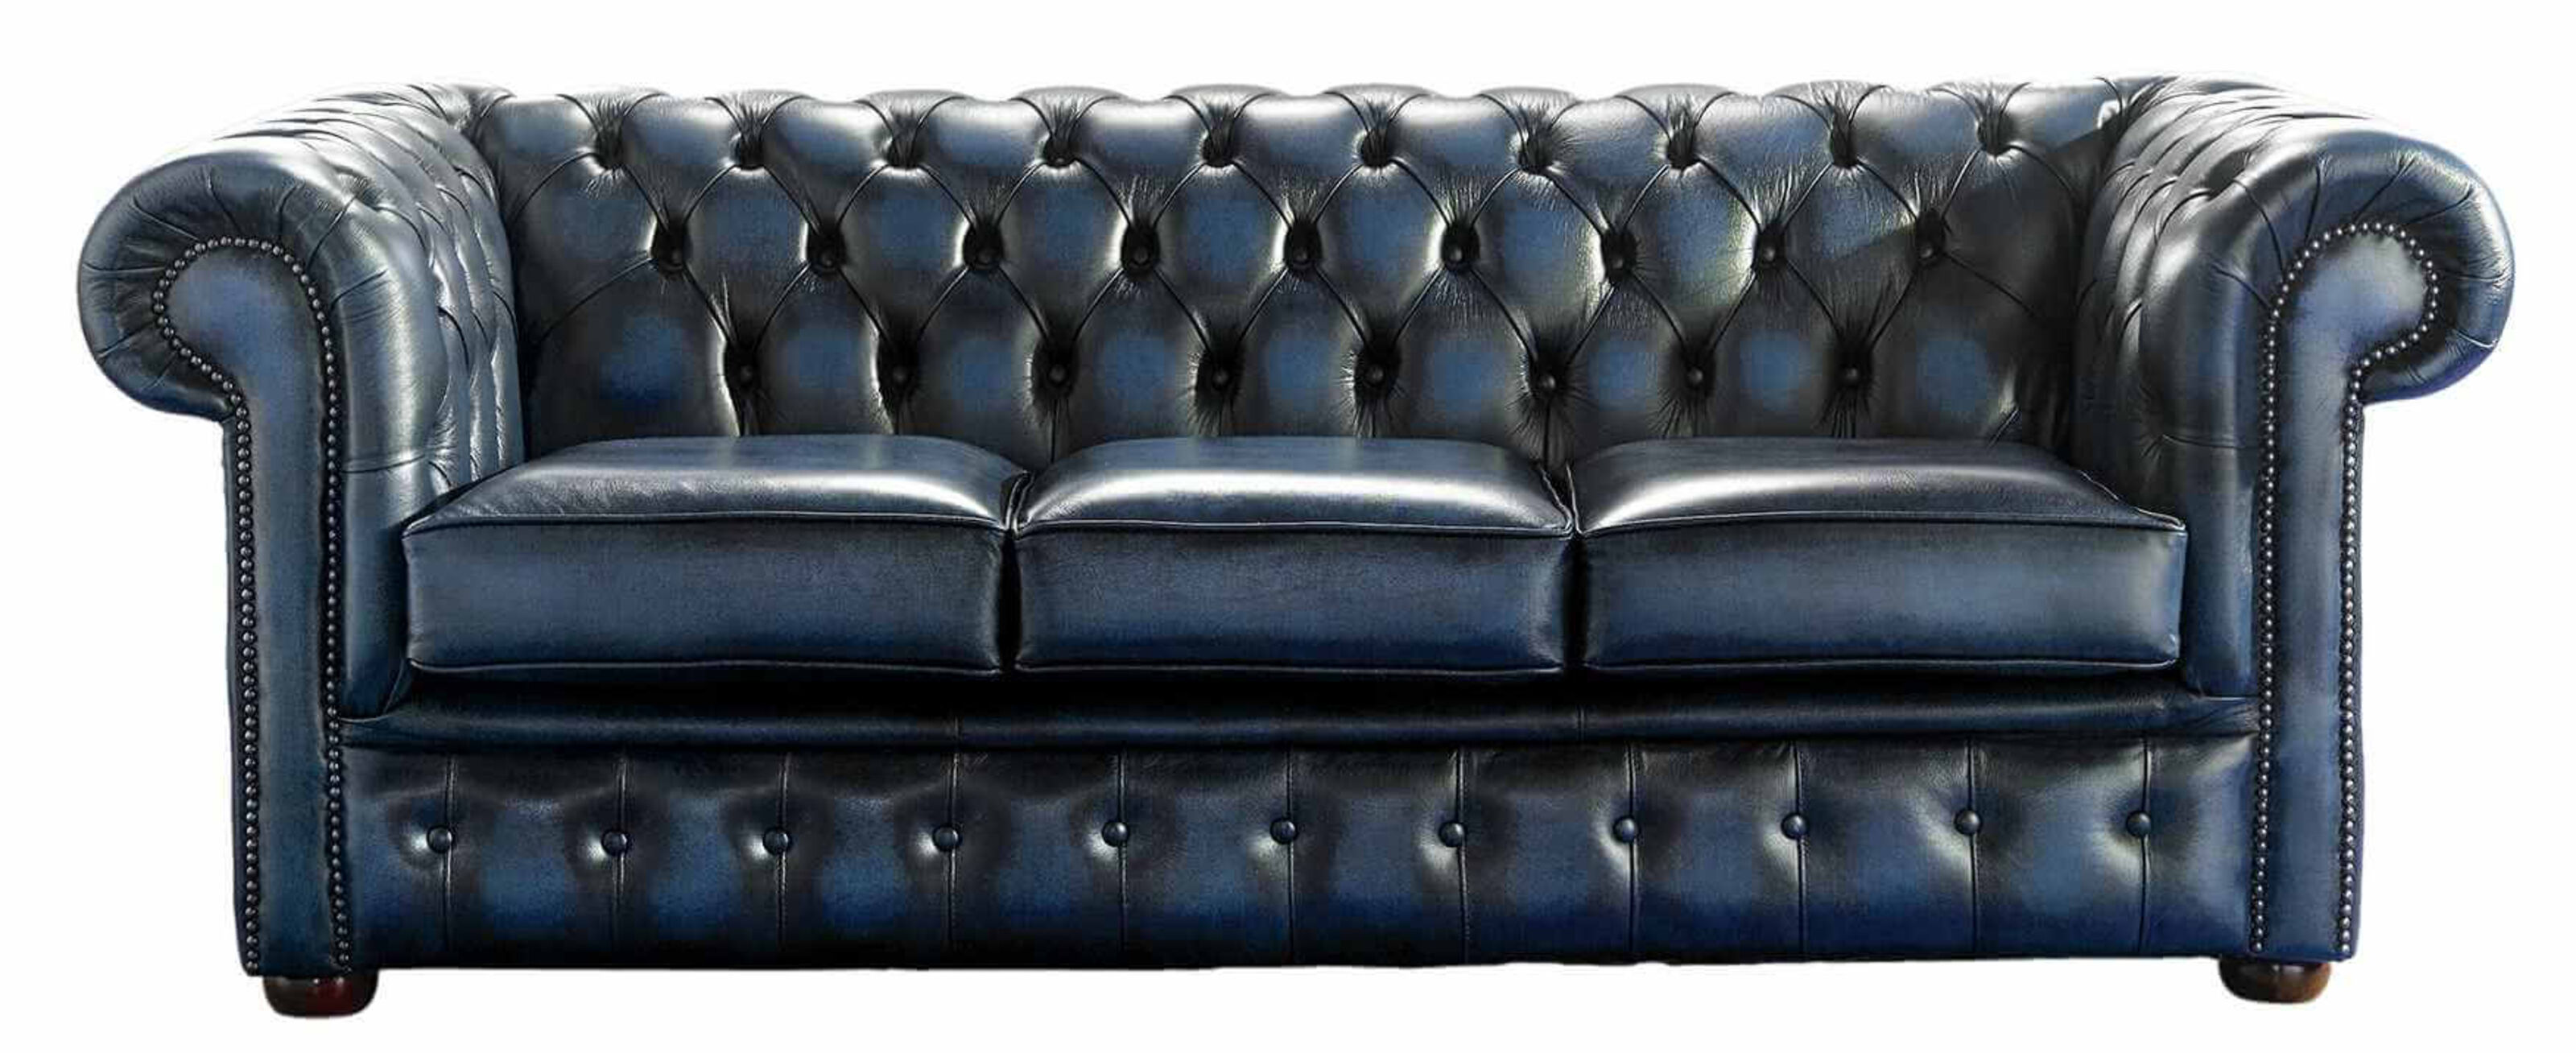 Understanding Sofa and Chesterfield Comparing Design and Features  %Post Title